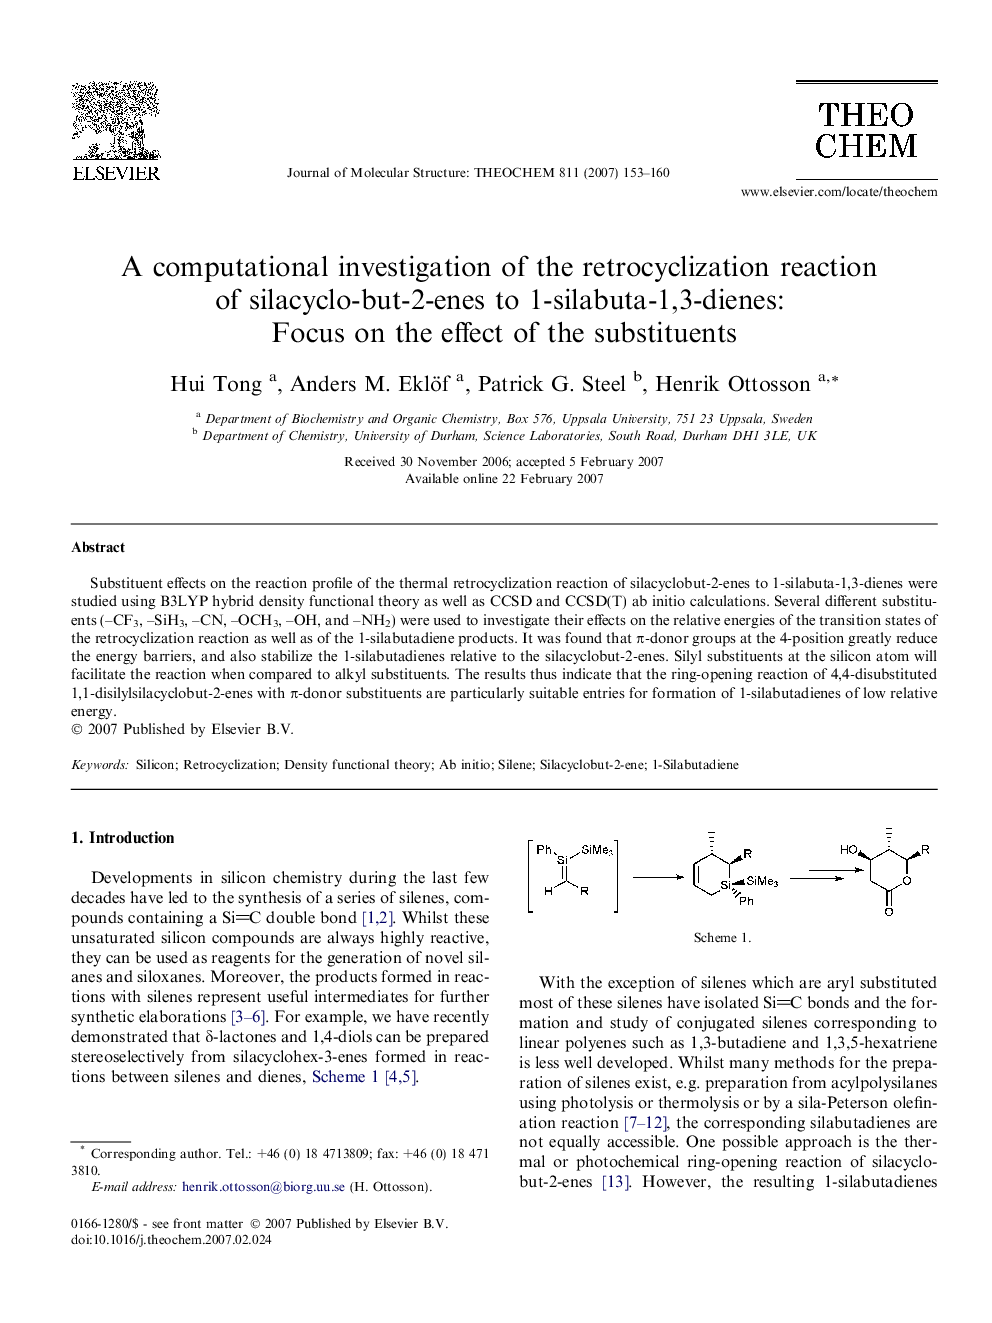 A computational investigation of the retrocyclization reaction of silacyclo-but-2-enes to 1-silabuta-1,3-dienes: Focus on the effect of the substituents